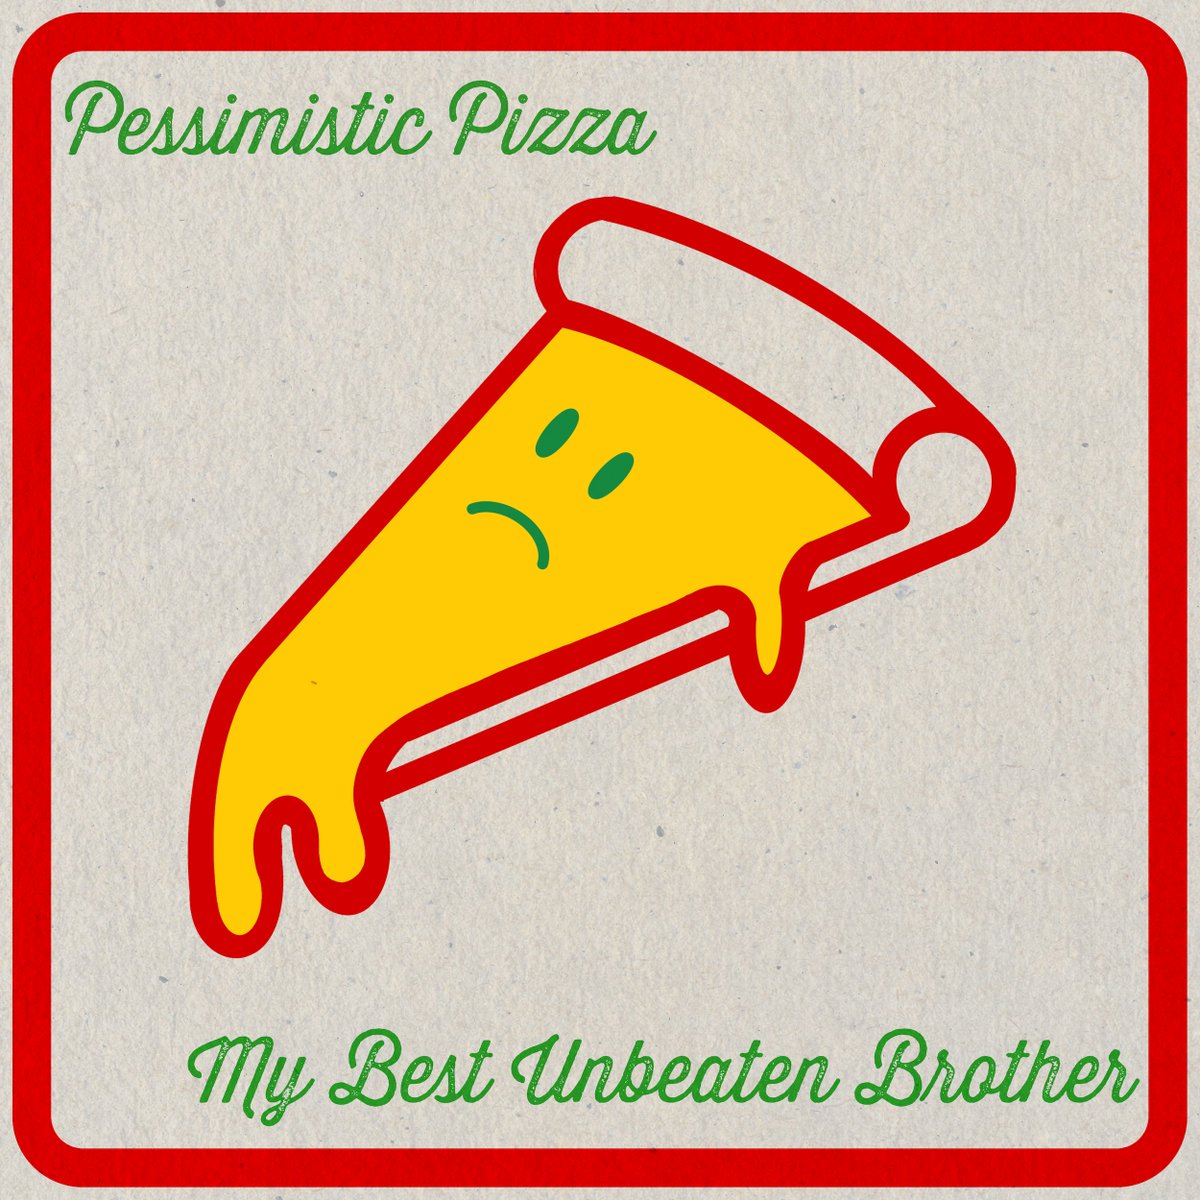 NEW: 'Pessimistic Pizza' by My Best Unbeaten Brother (ex-Nosferatu D2 / Superman Revenge Squad) is available now for pre-order. Lead single 'Time on Our Hands, Spider-Man' is out today and streaming all over. Bandcamp: mybestunbeatenbrother.bandcamp.com/album/pessimis… Spotify: open.spotify.com/playlist/2wLyS…